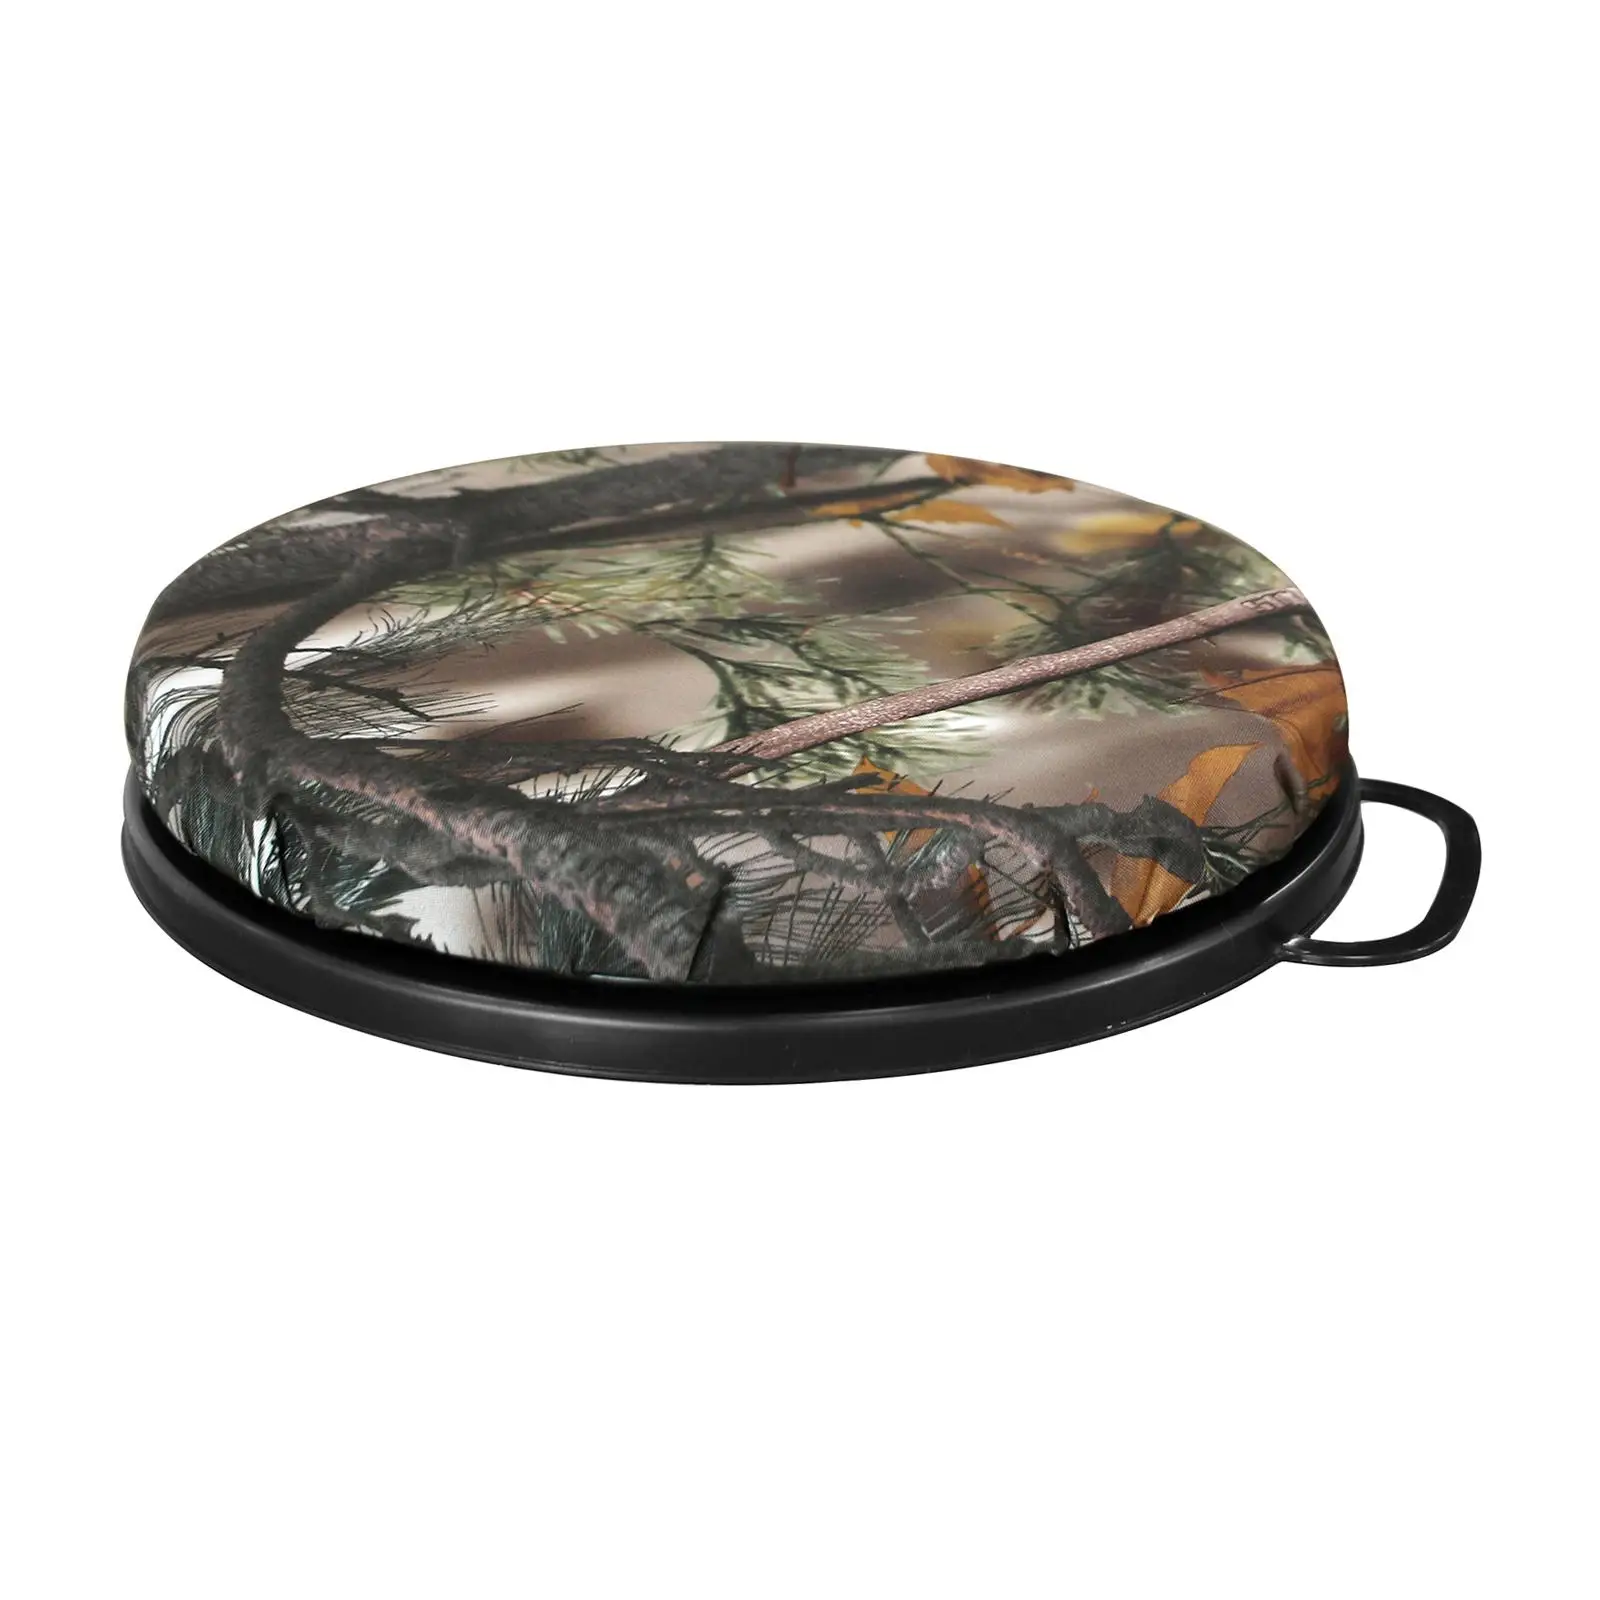 Hunting Seat Cushion Lightweight Oxford Cloth for Concerts Hiking Garden